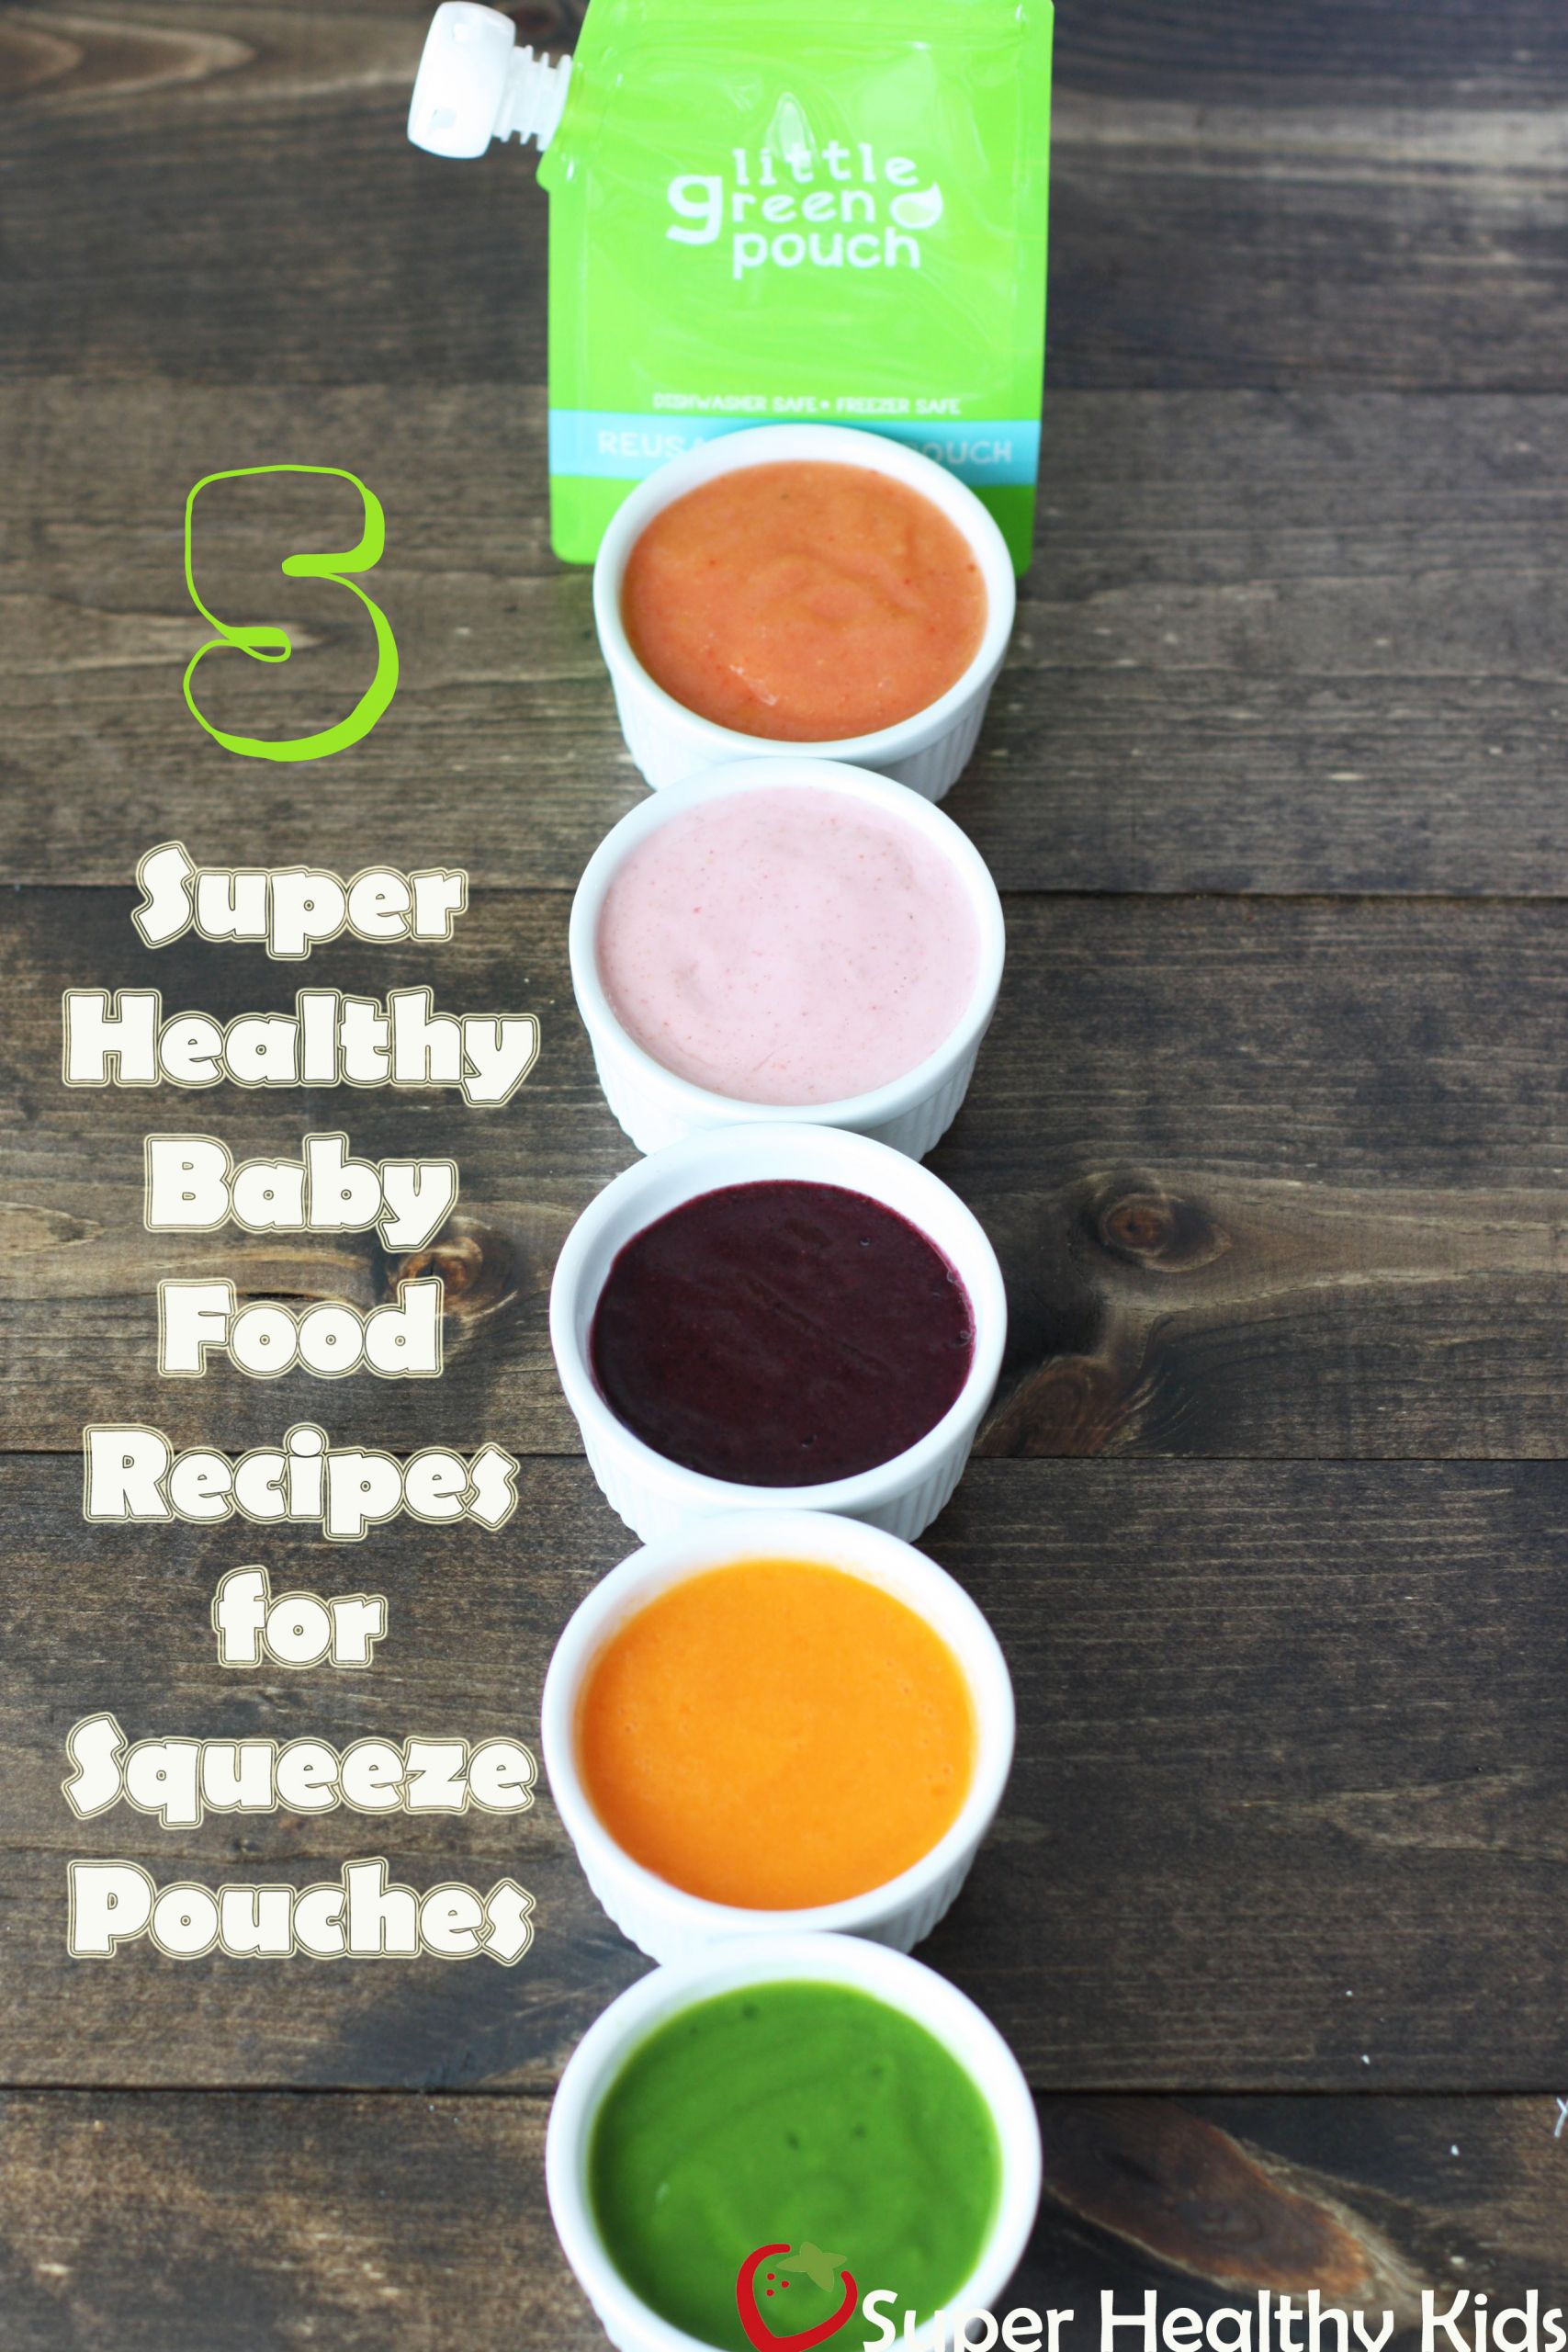 Best Baby Food Recipe Book
 5 Super Healthy Baby Food Recipes for Squeeze Pouches